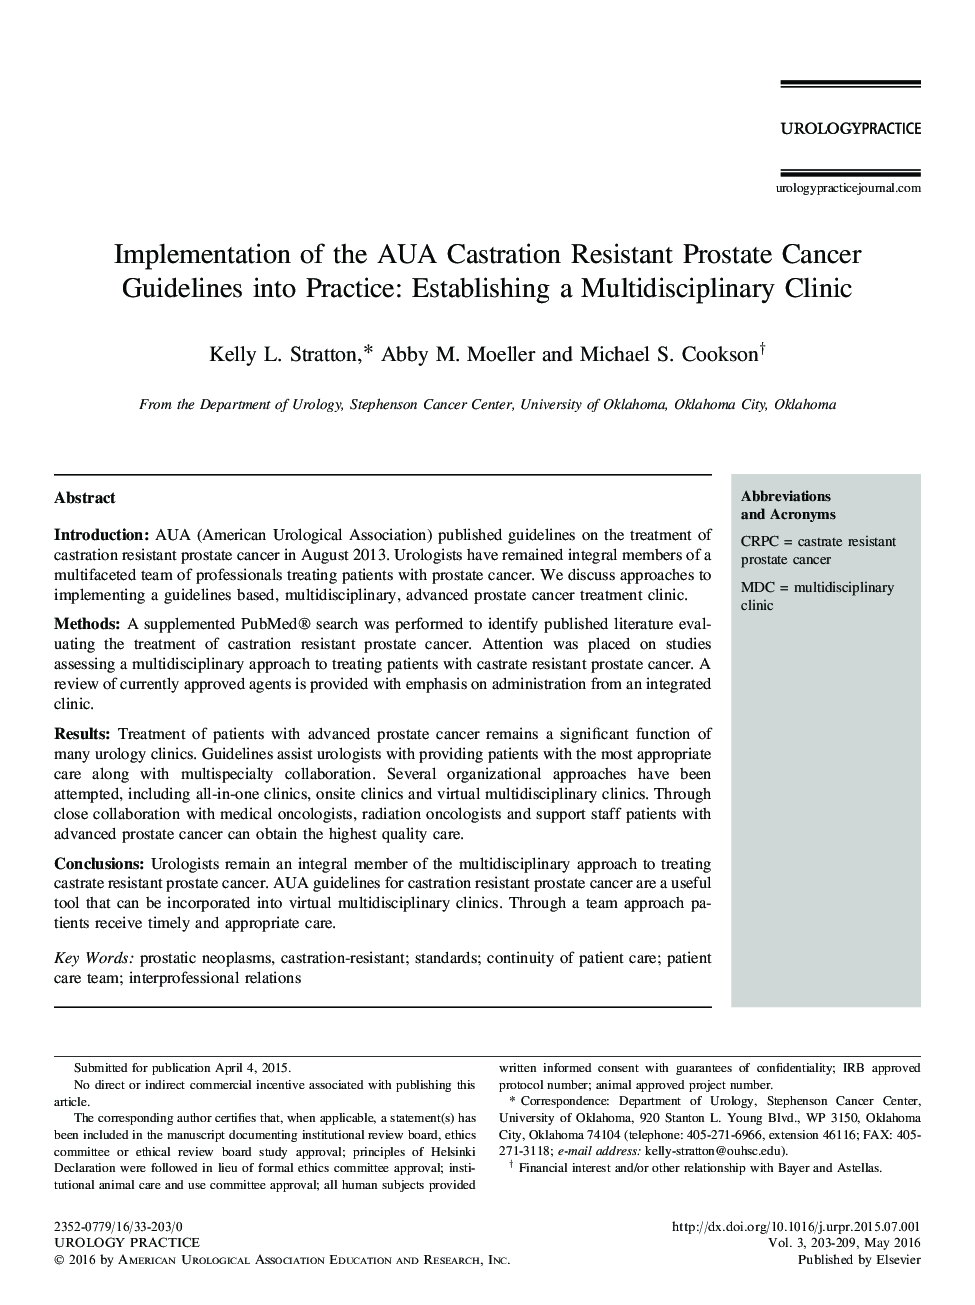 Implementation of the AUA Castration Resistant Prostate Cancer Guidelines into Practice: Establishing a Multidisciplinary Clinic